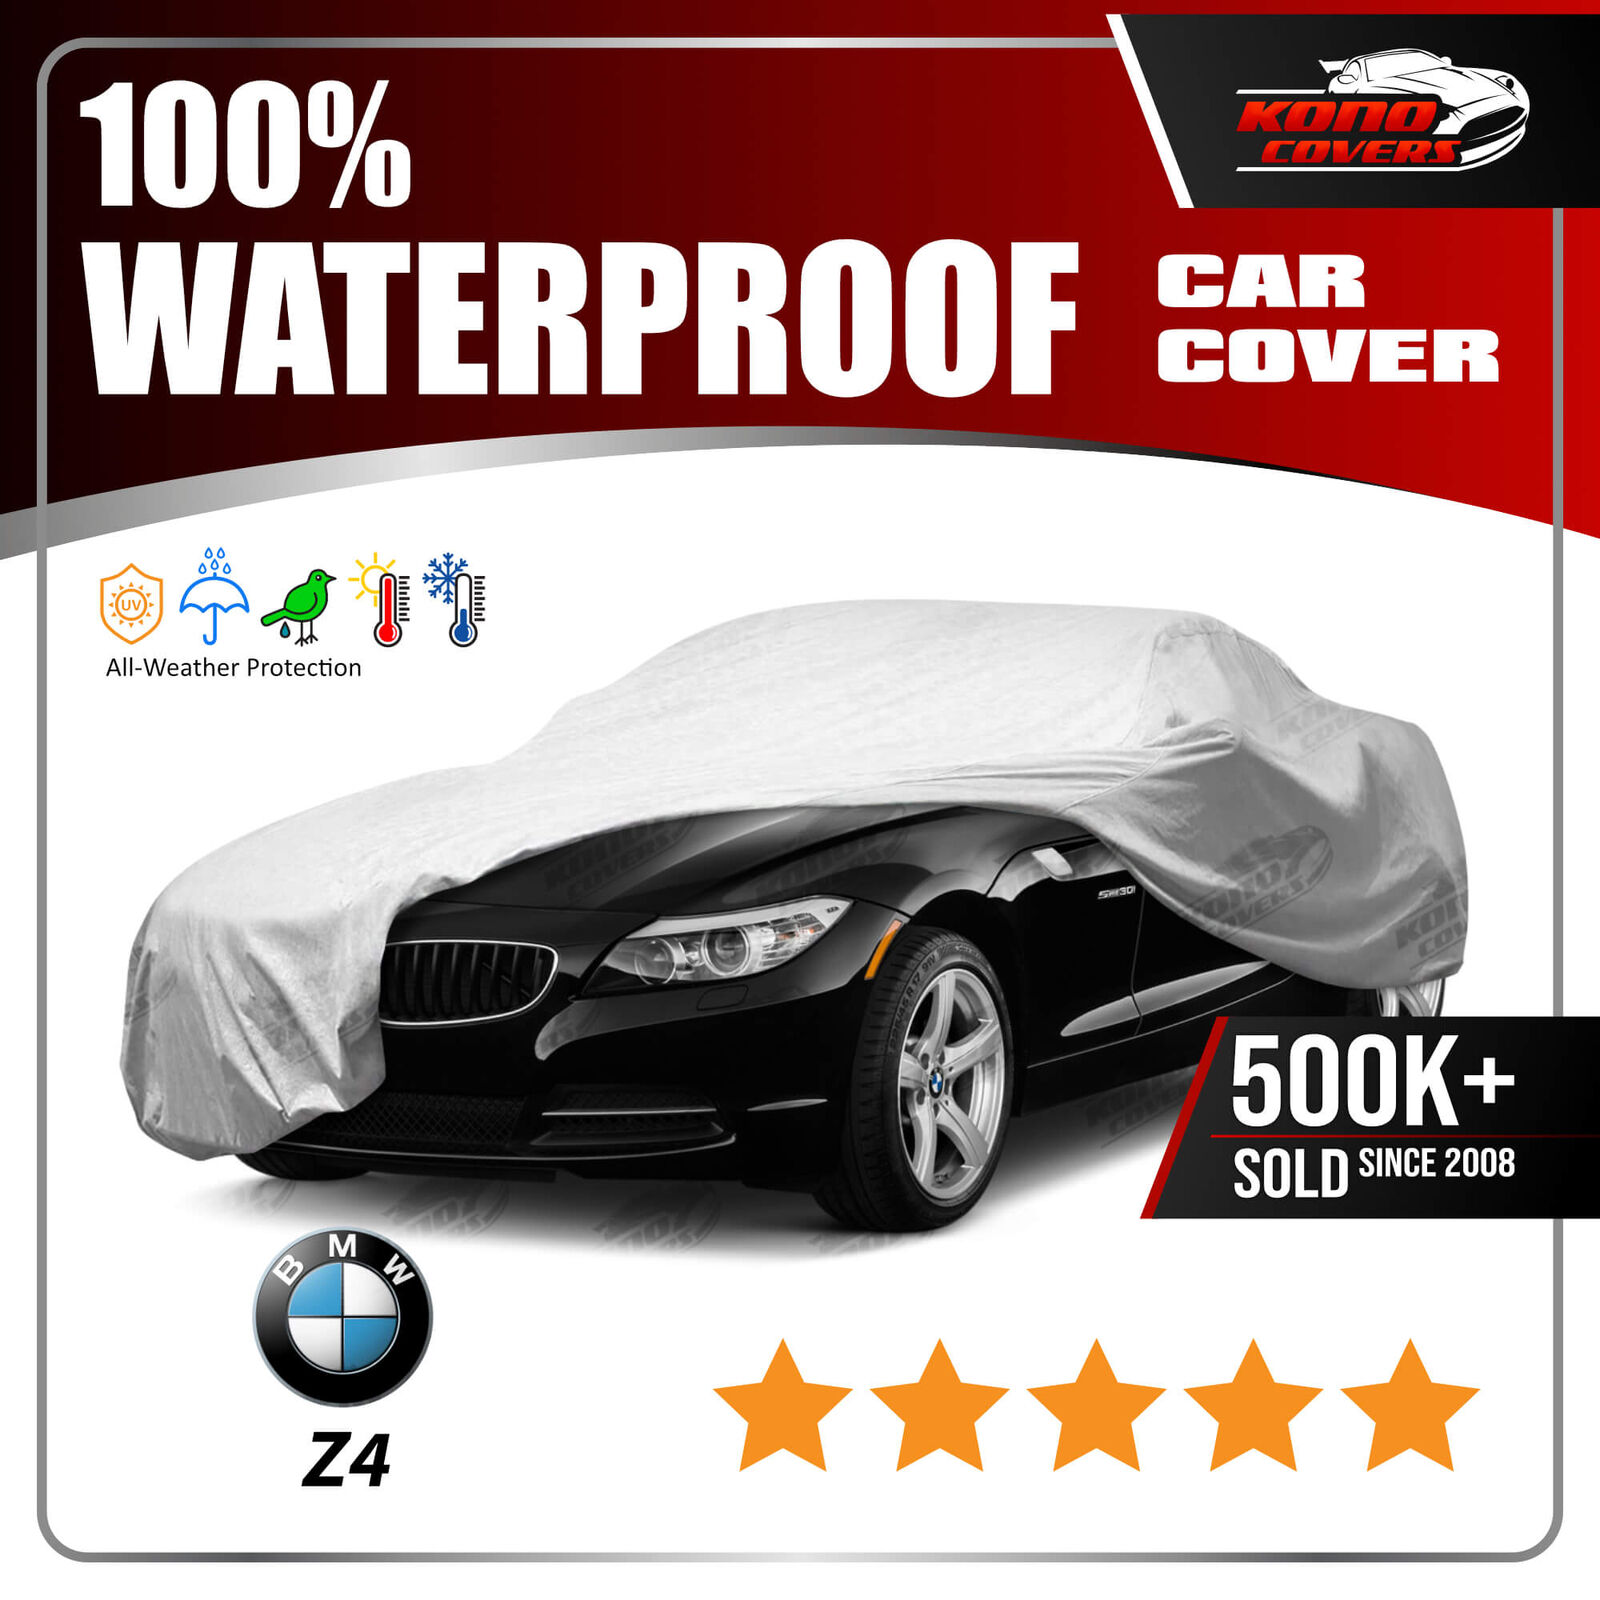 BMW Z4 2003-2011 CAR COVER - 100% Waterproof 100% Breathable